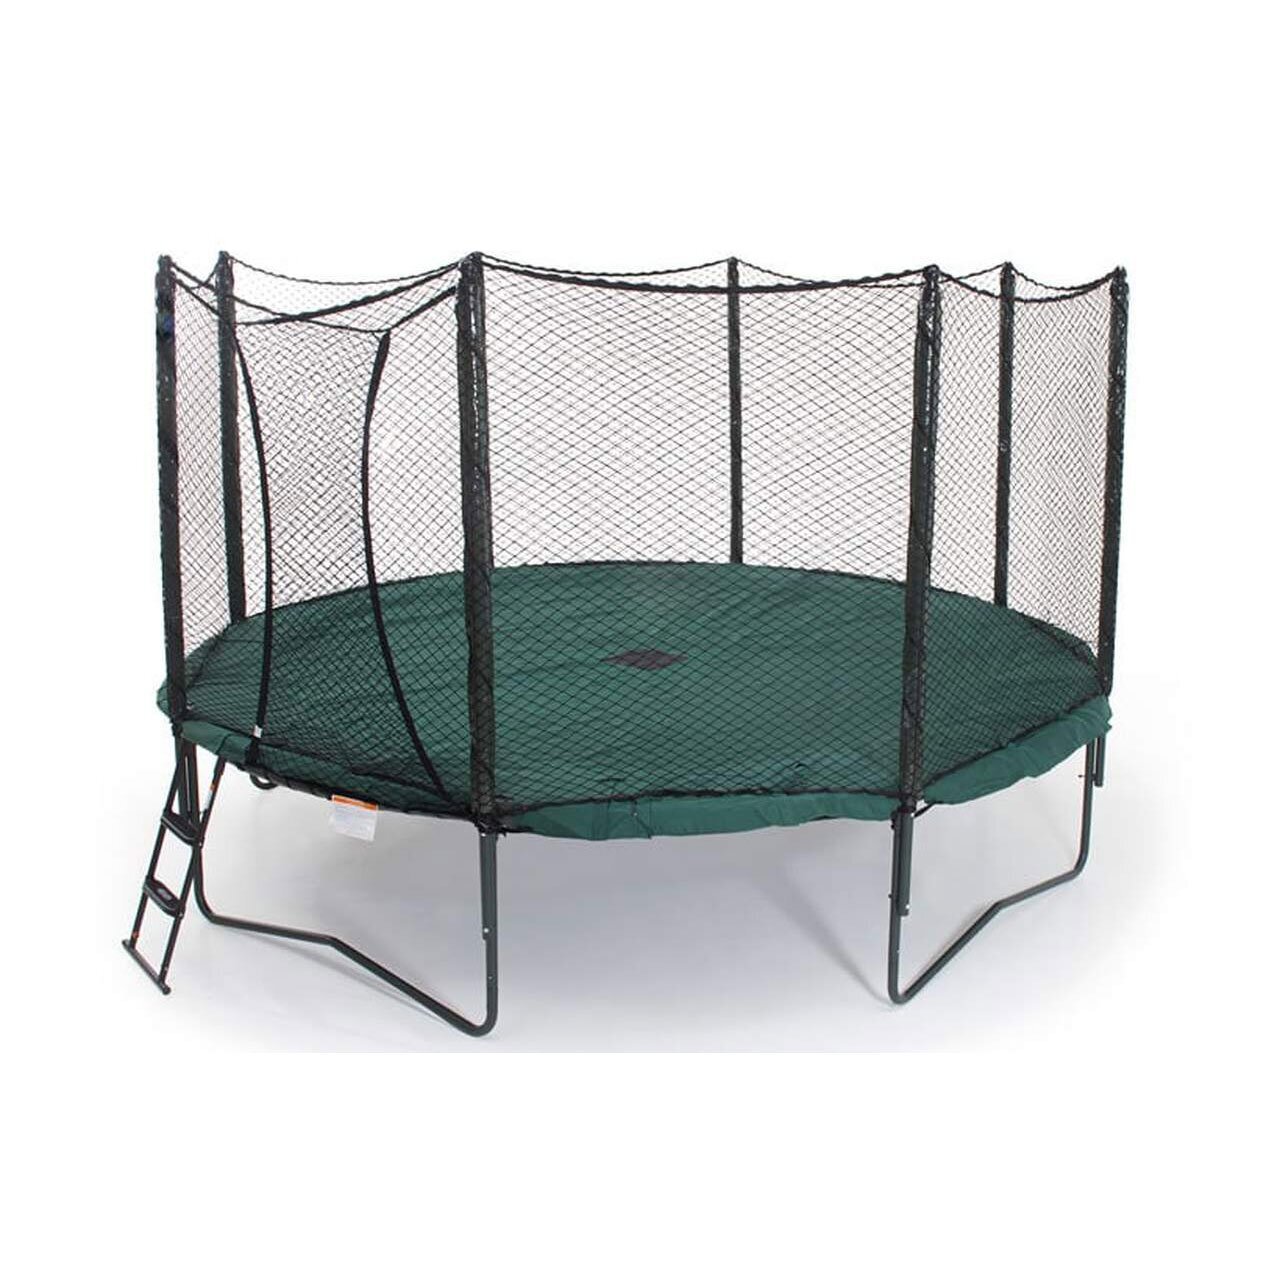 PVC Coated Polyester Trampoline Protective Cover